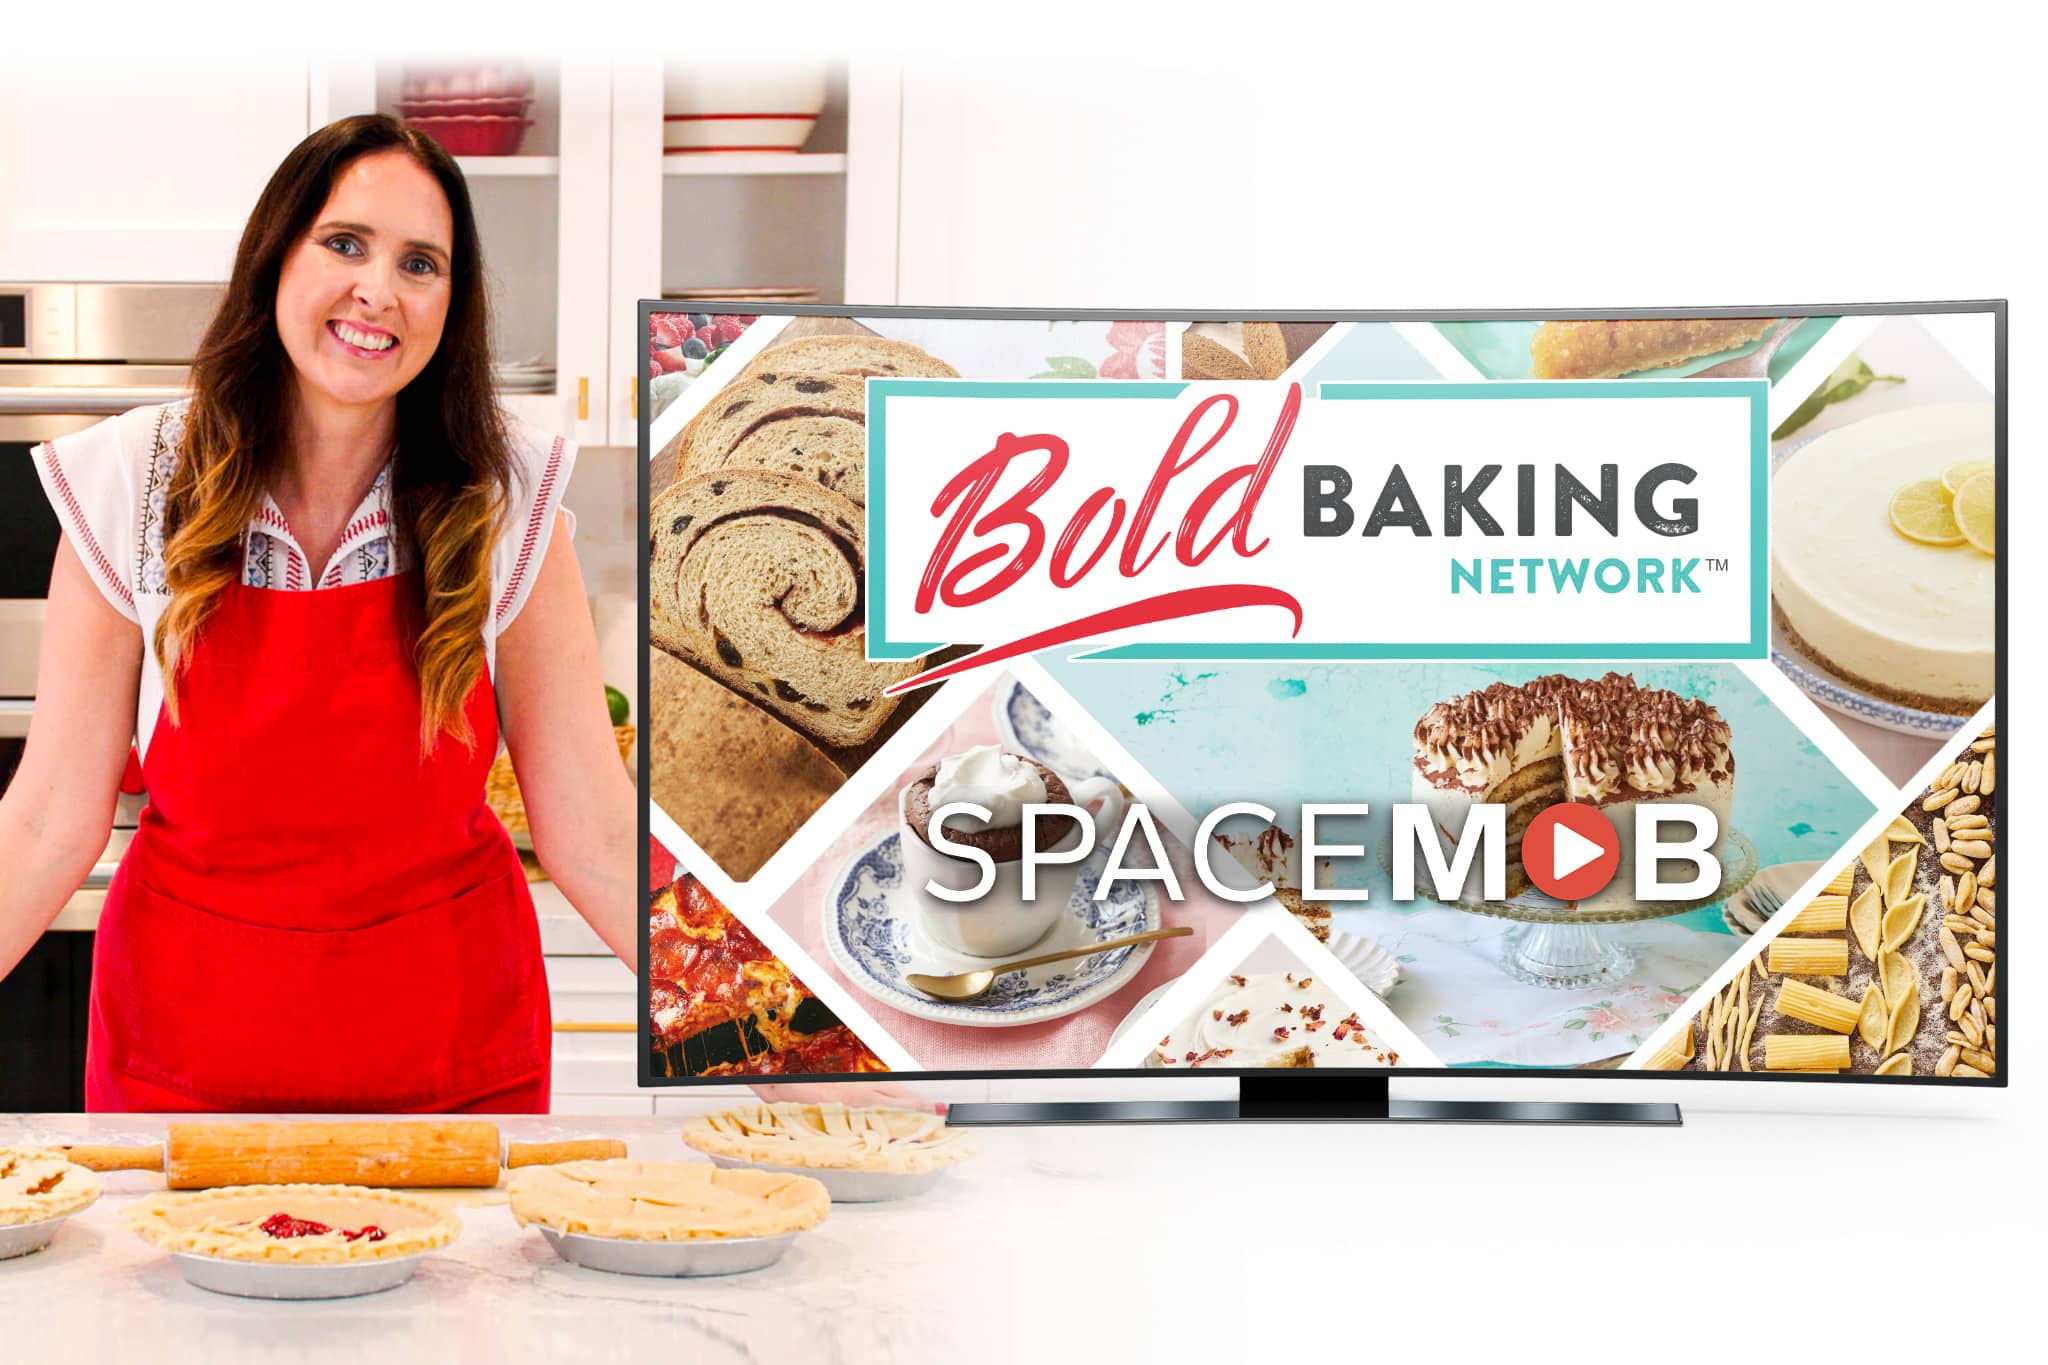 Bold Baking Network SPACEMOB Partnership Announcement